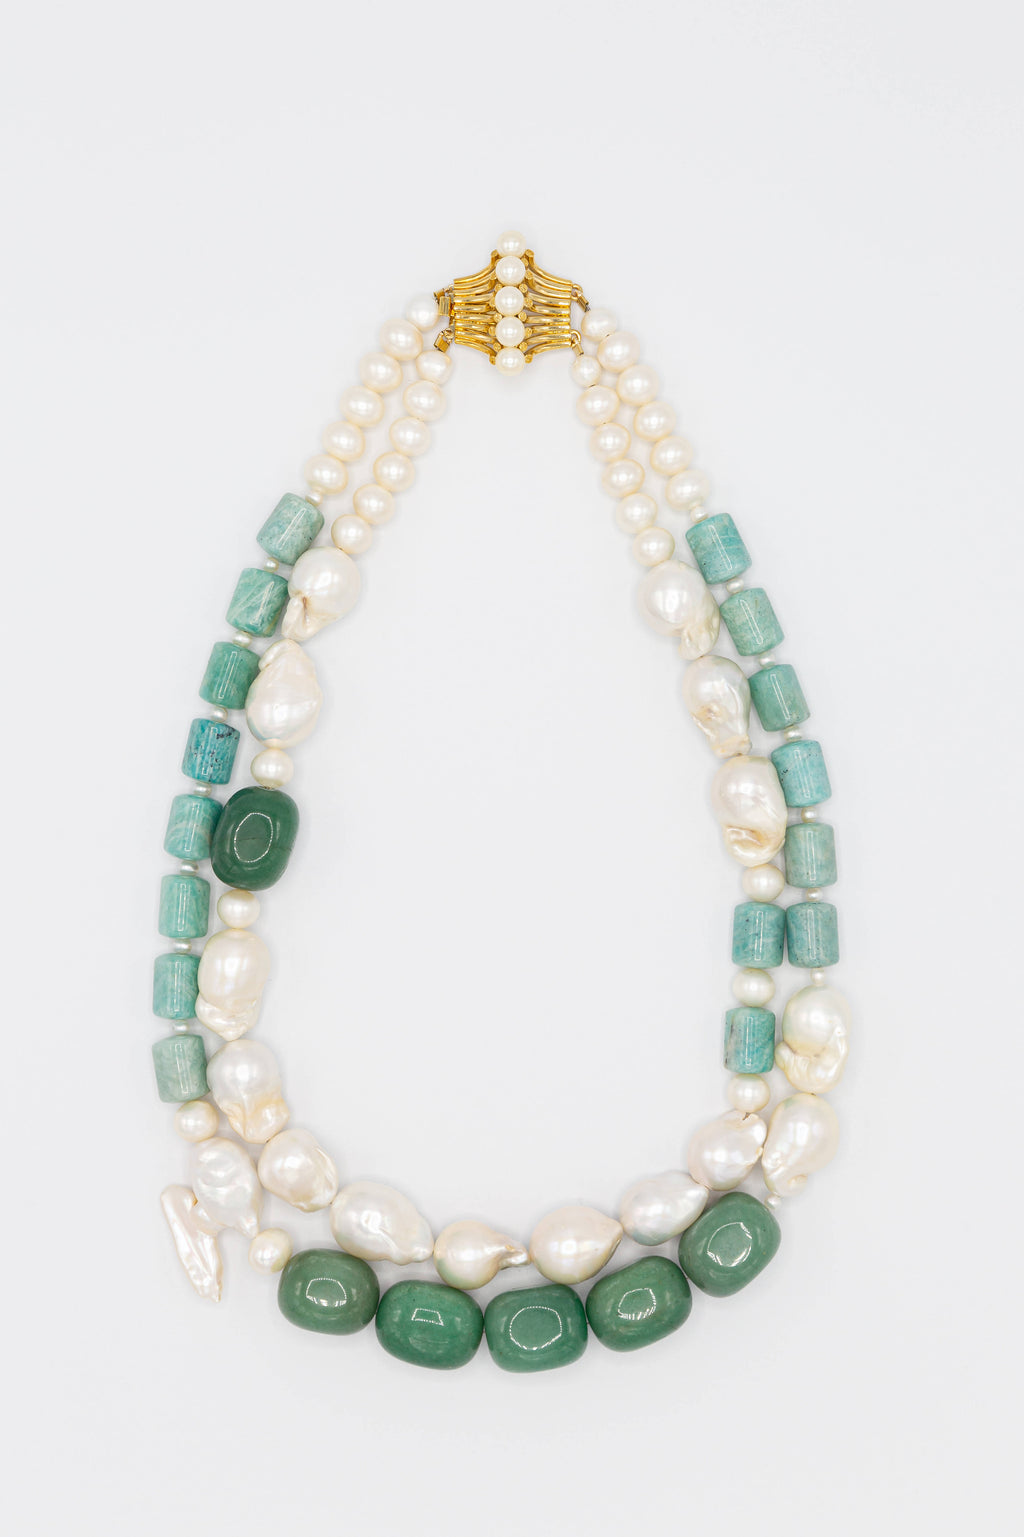 Double necklace pearls and gemstones - Avanguardian Gallery London